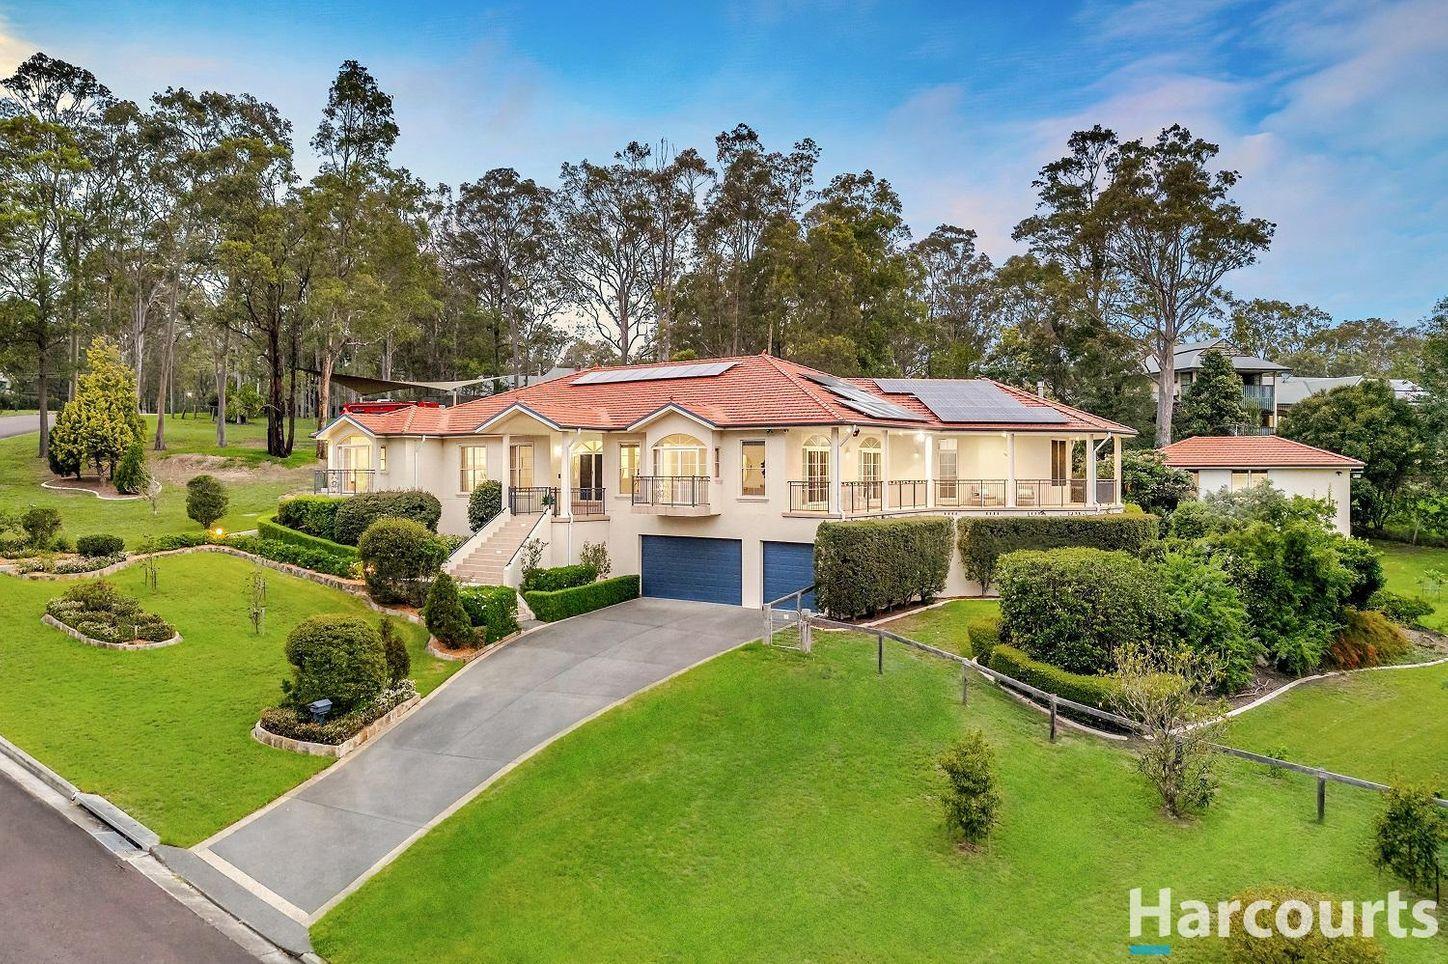 Prop-GPT: House: Newcastle and Lake Macquarie, NSW East Maitland, Hunter, NSW 2323 New South Wales 2323